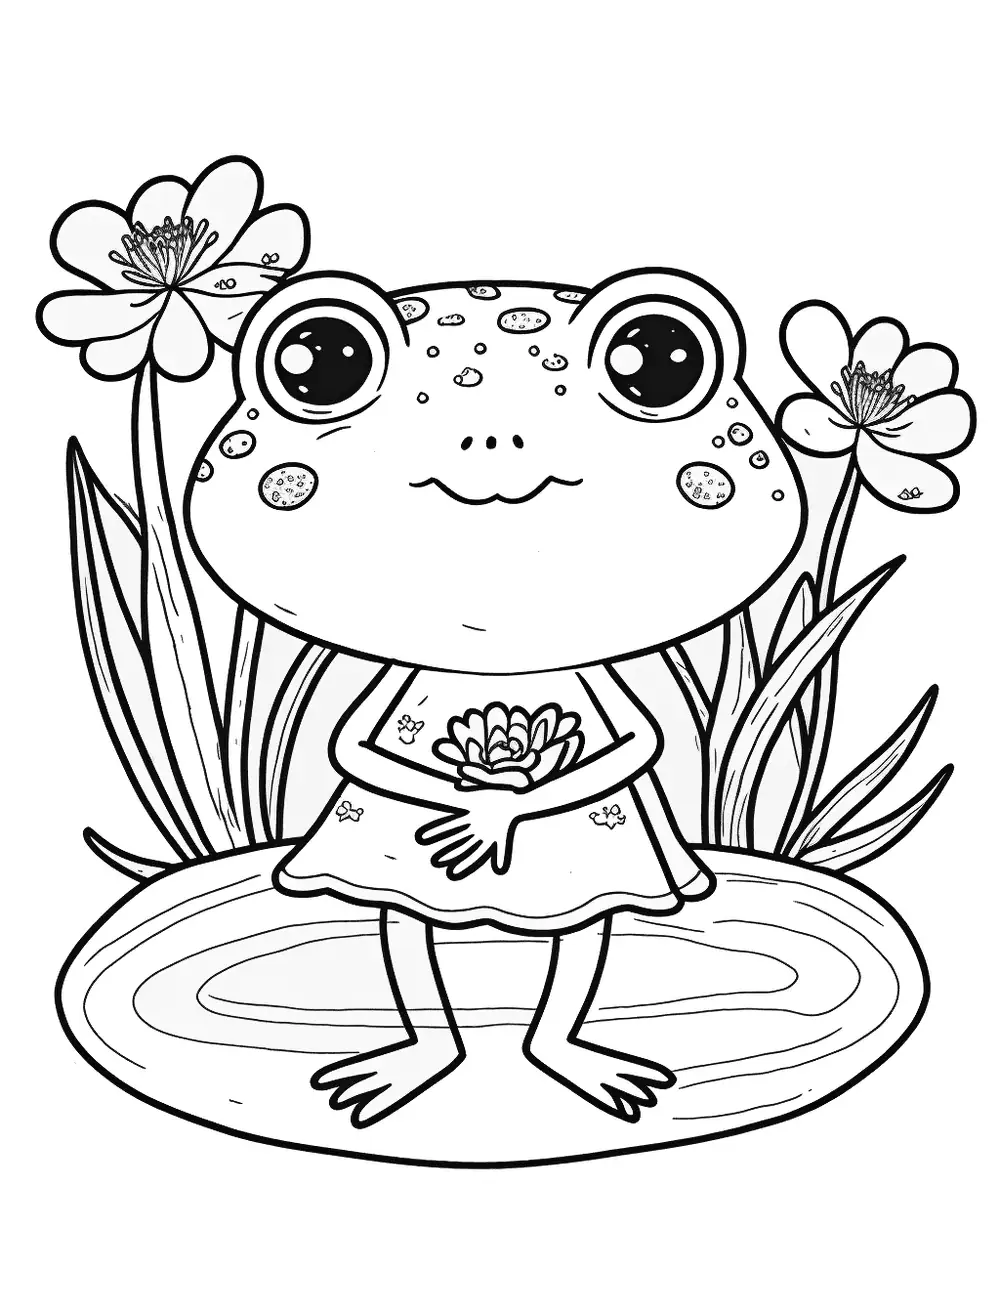 Girl Frog With Flowers Coloring Page - A girl frog, with a bow in her hair, carrying a bouquet of flowers